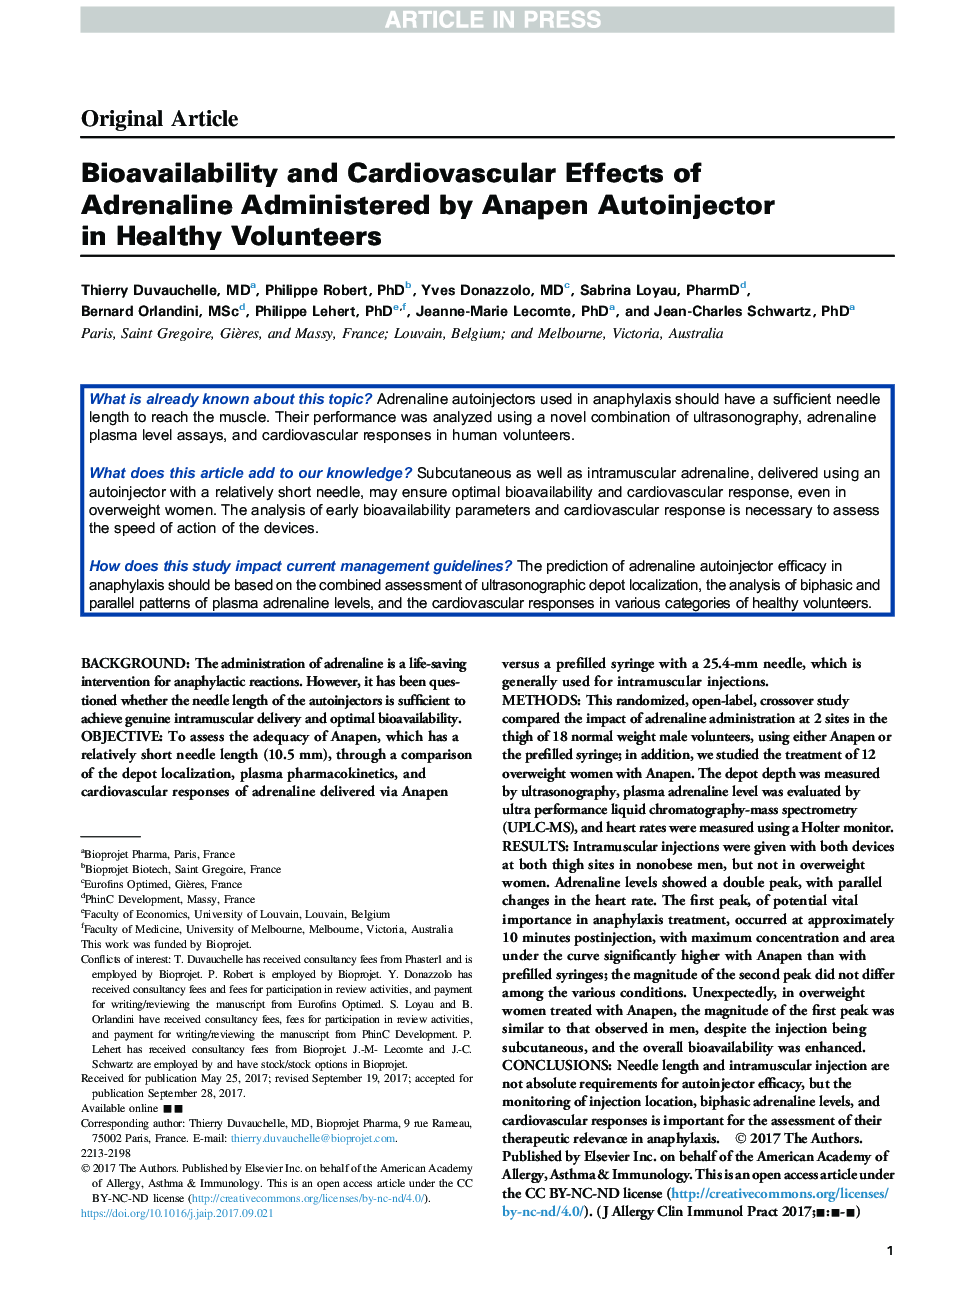 Bioavailability and Cardiovascular Effects of Adrenaline Administered by Anapen Autoinjector in Healthy Volunteers